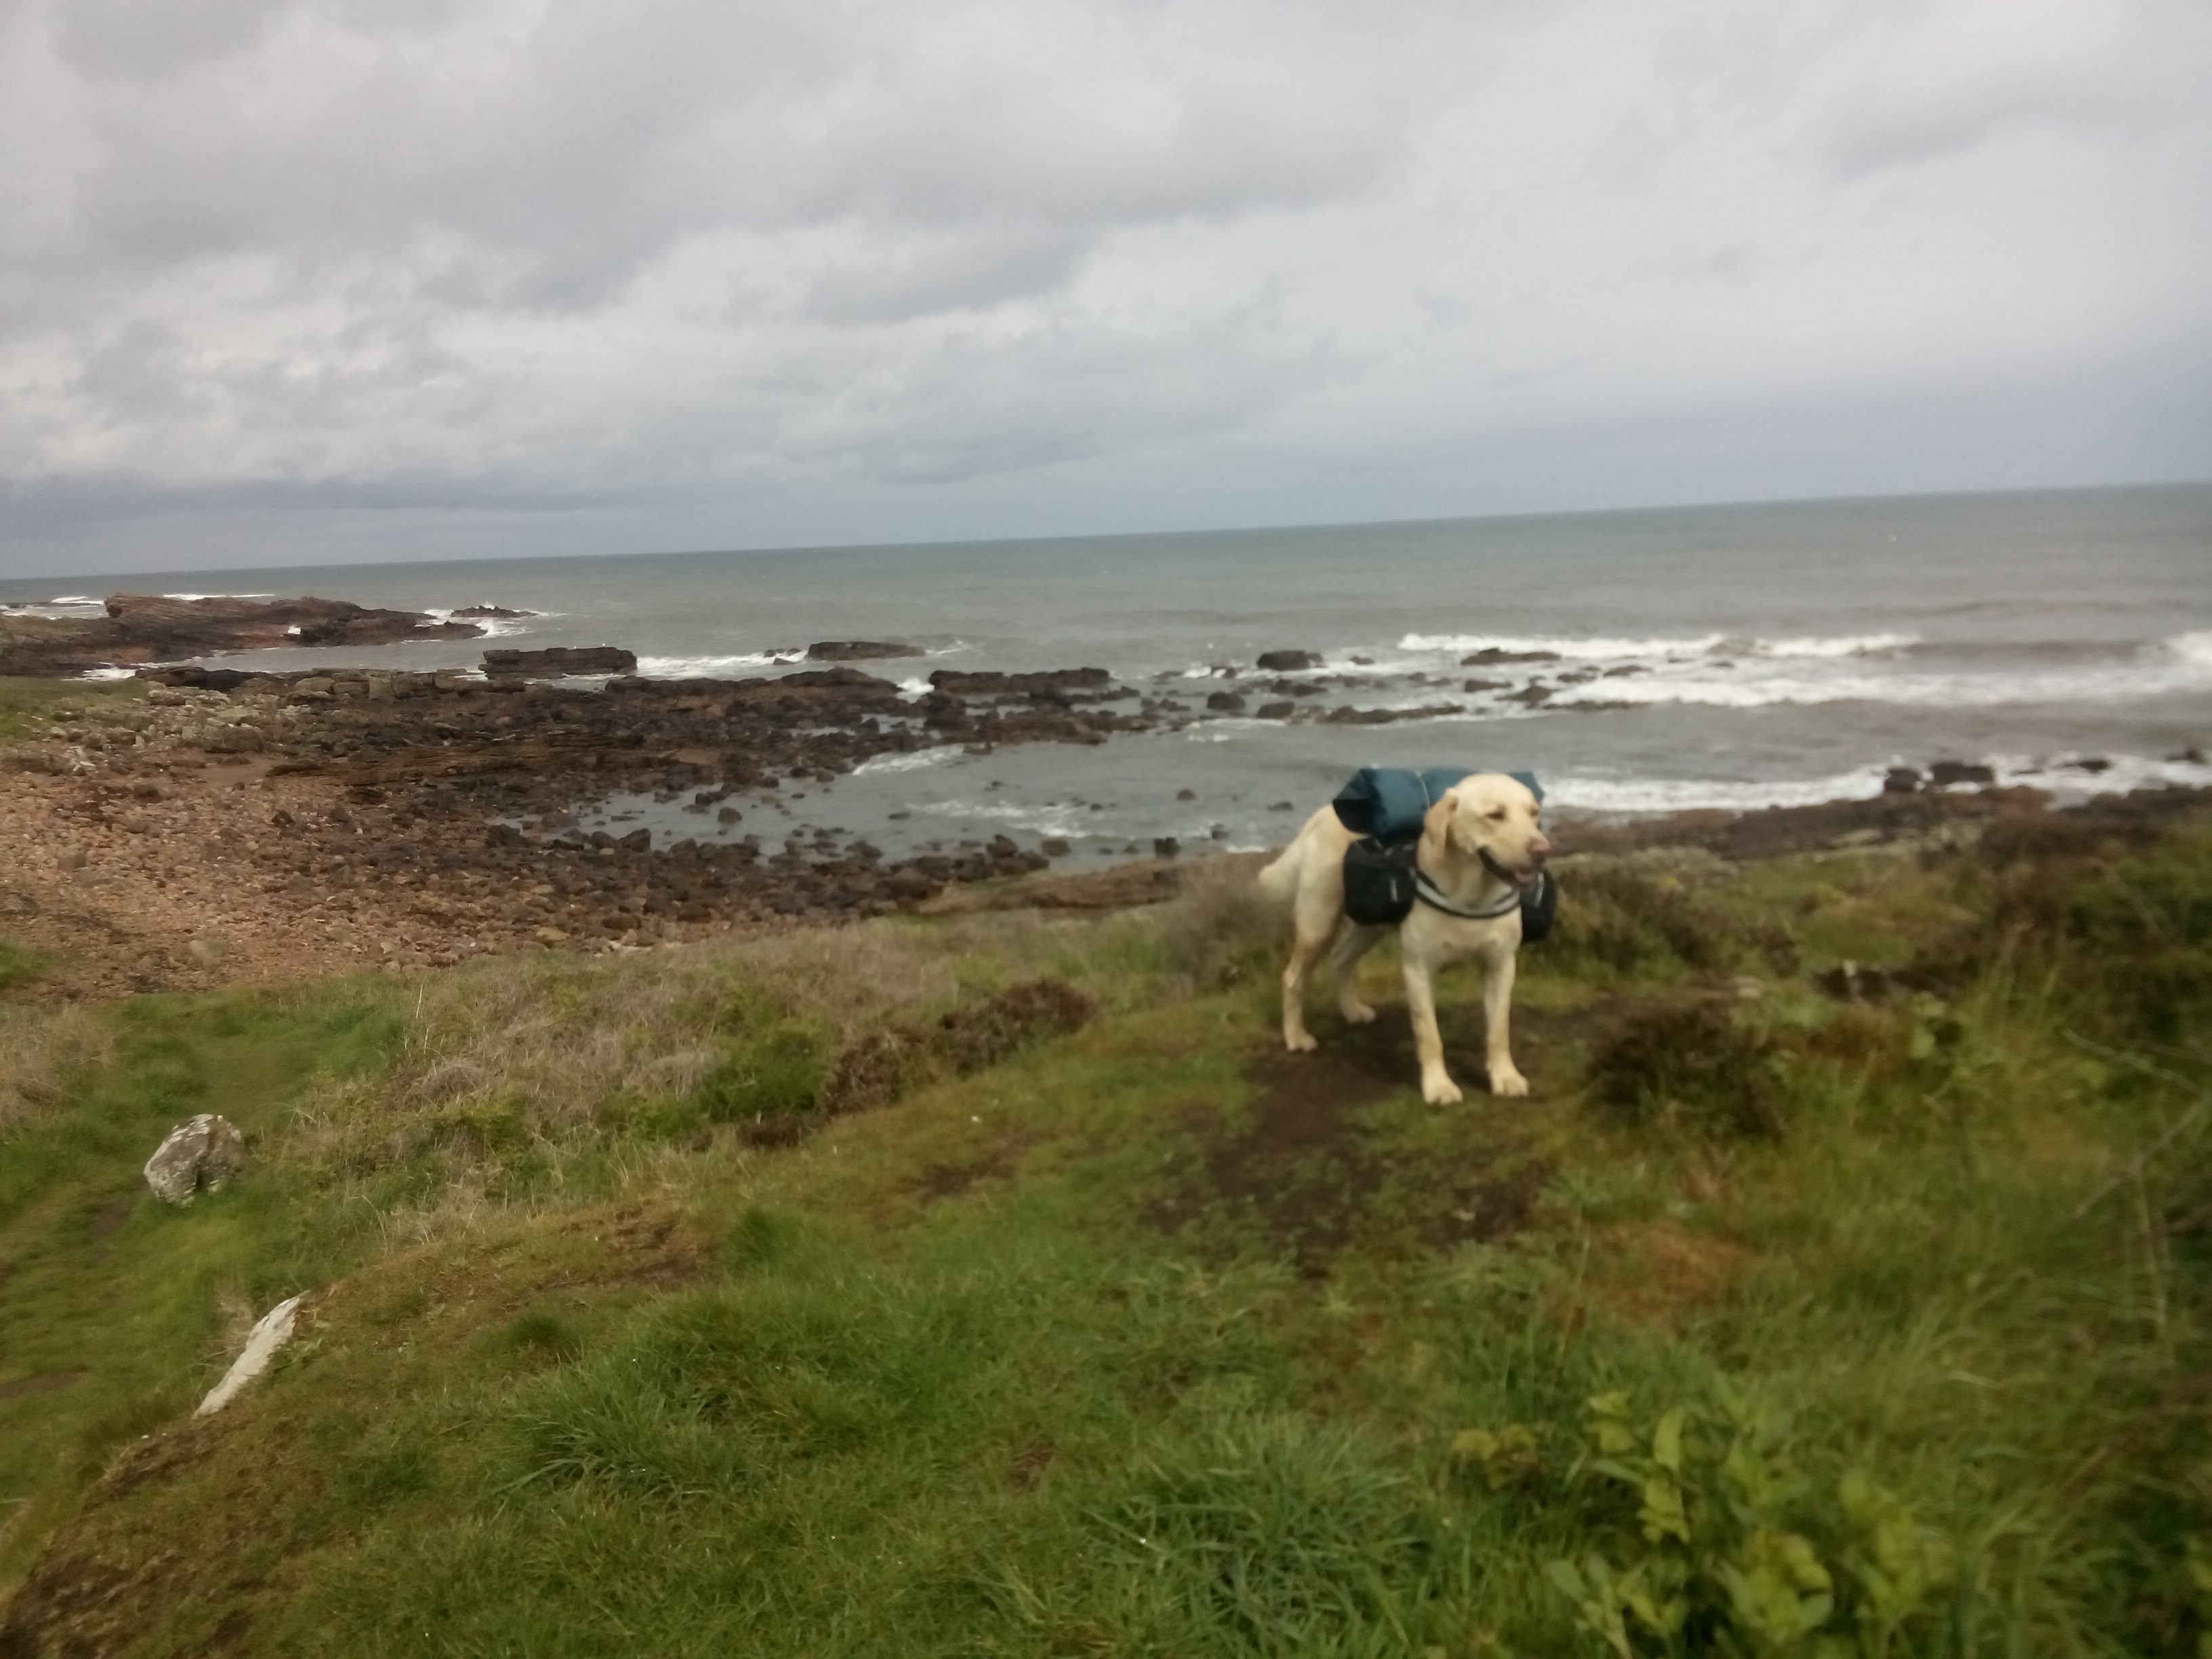 A golden lab with a backpack stands on a grassy knoll above a rocky beach and churning sea